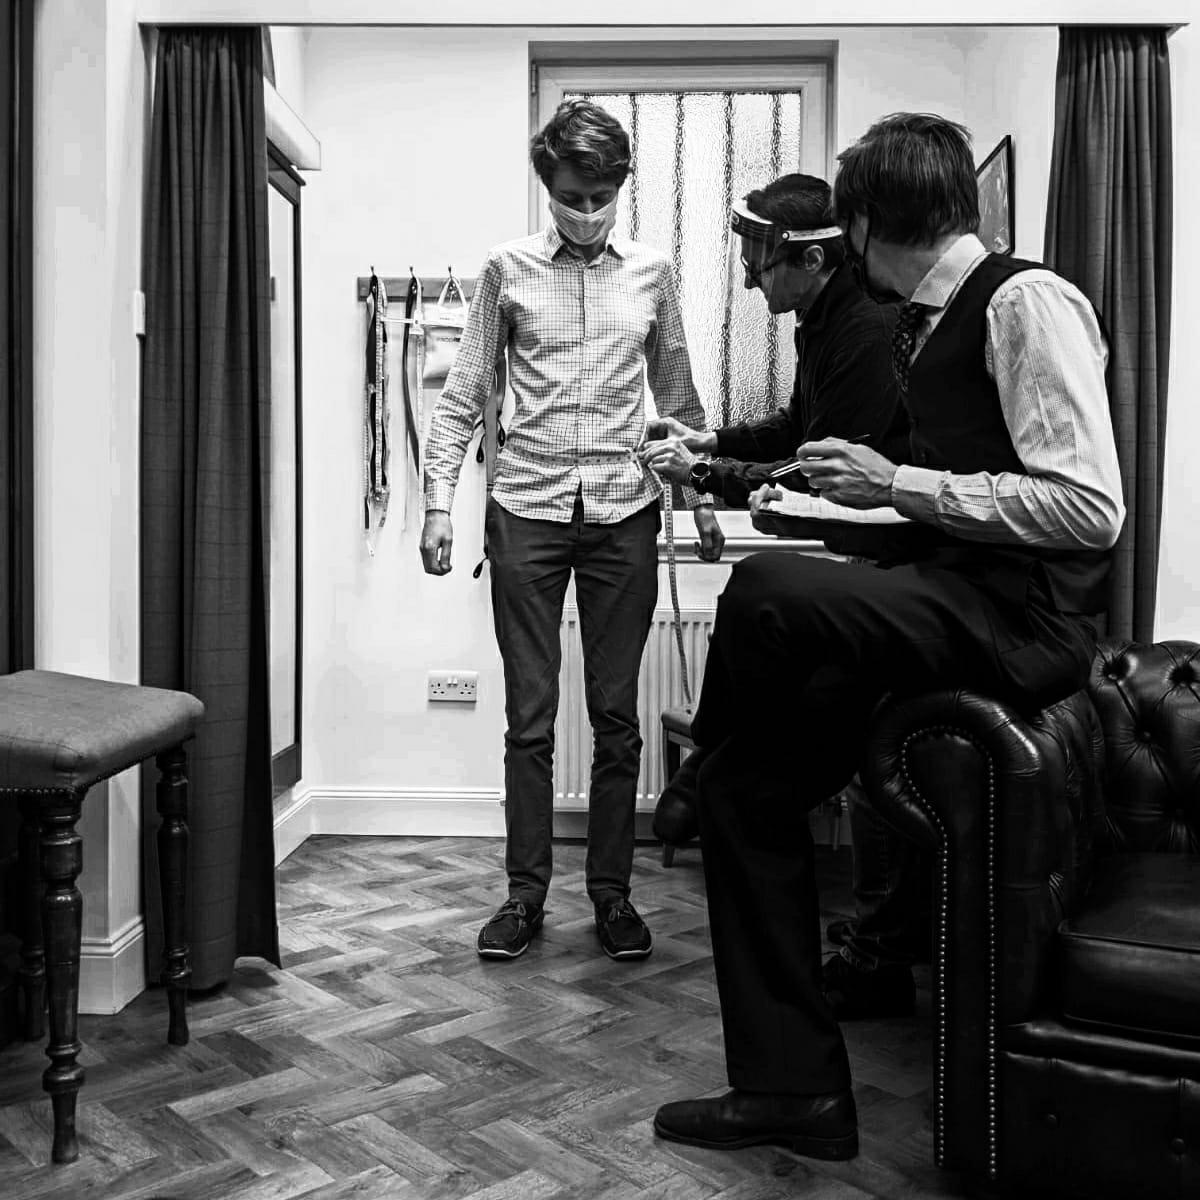 Getting a Made-to-Measure Suit from Livingston Bespoke, Castle Douglas visit dumfries and galloway